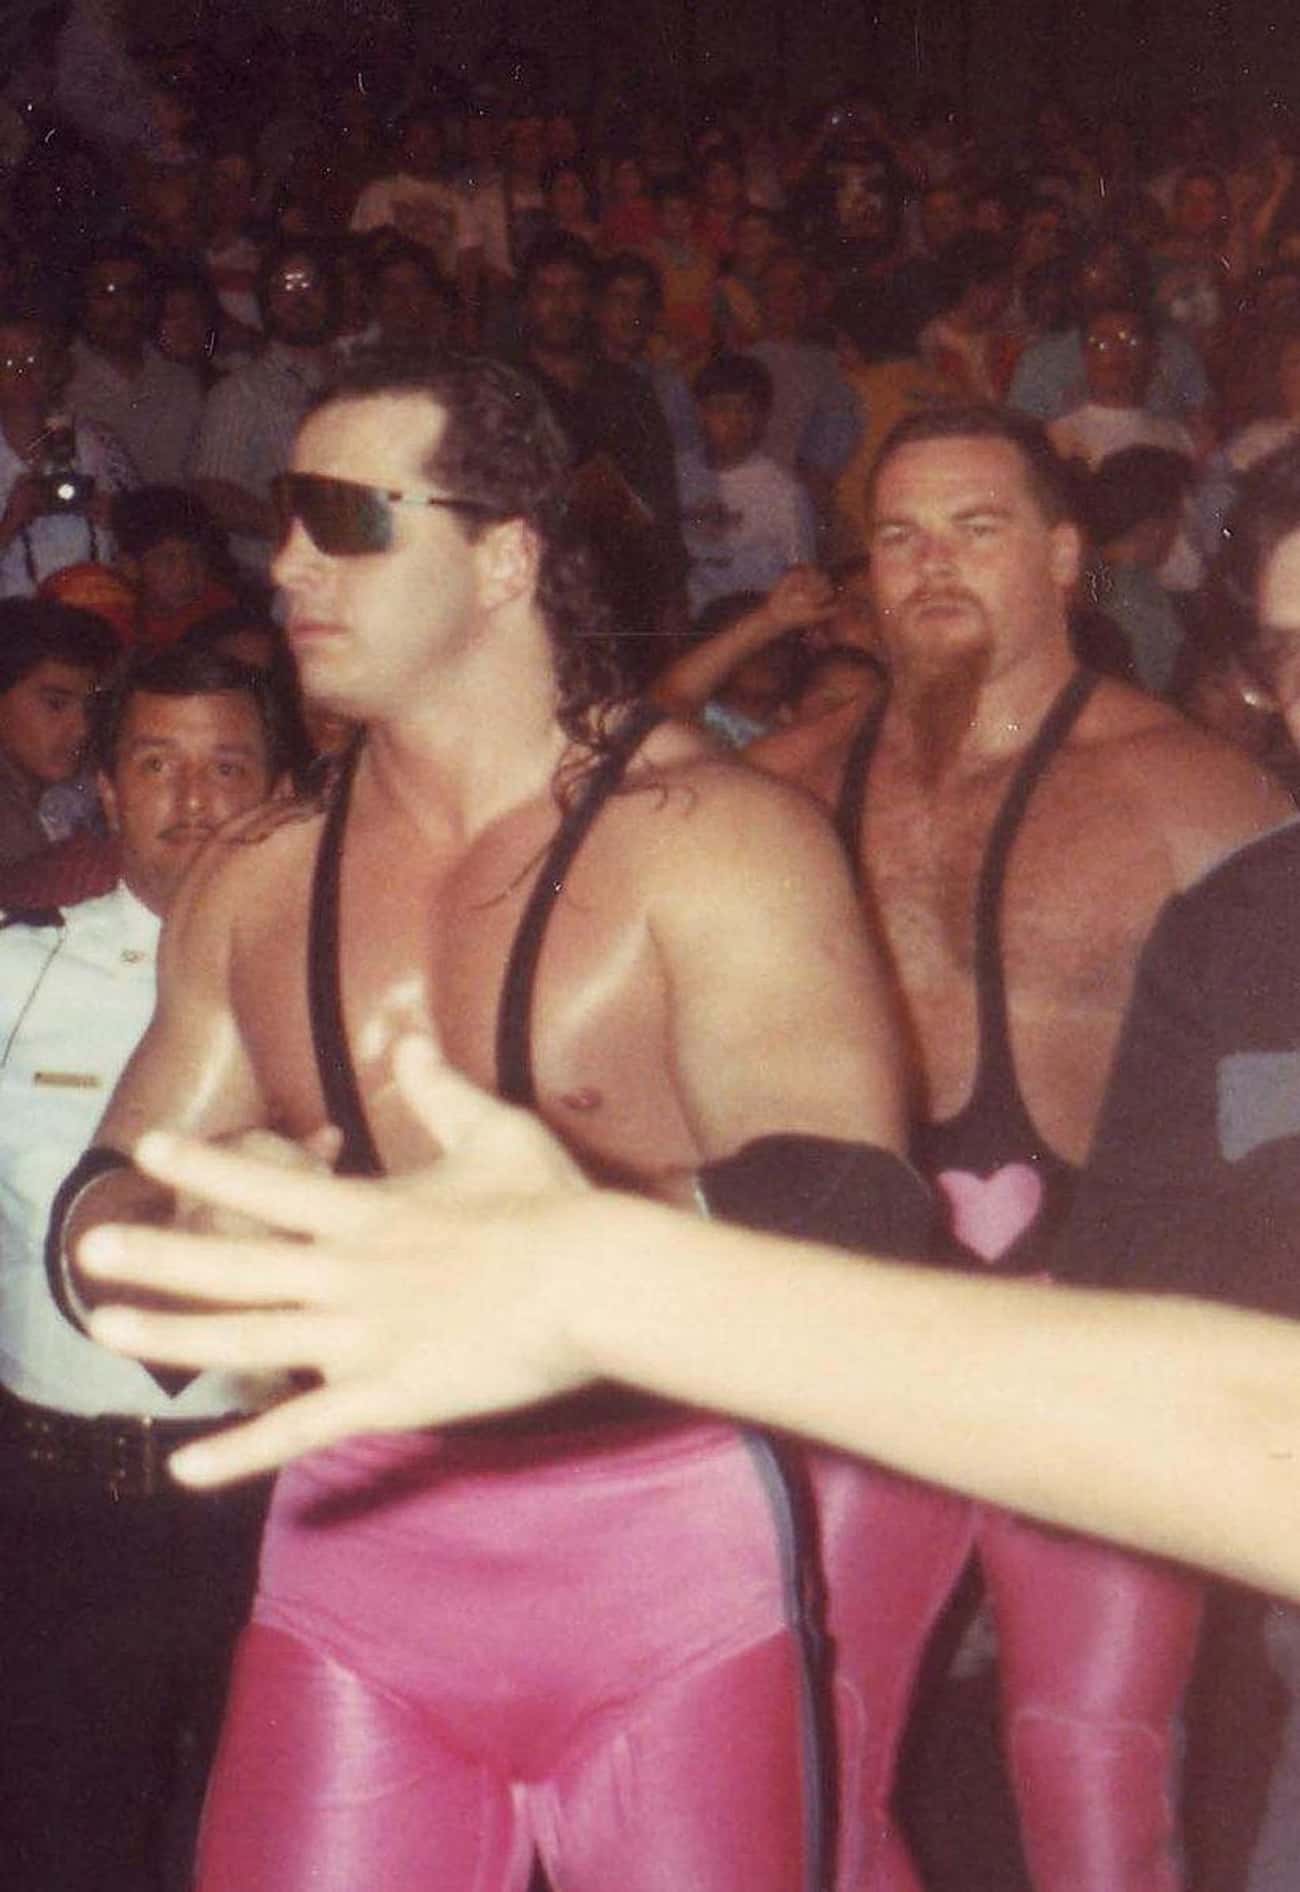 Bret Hart Is Rumored To Have Clotheslined Vince McMahon In A Gentlemen's Club